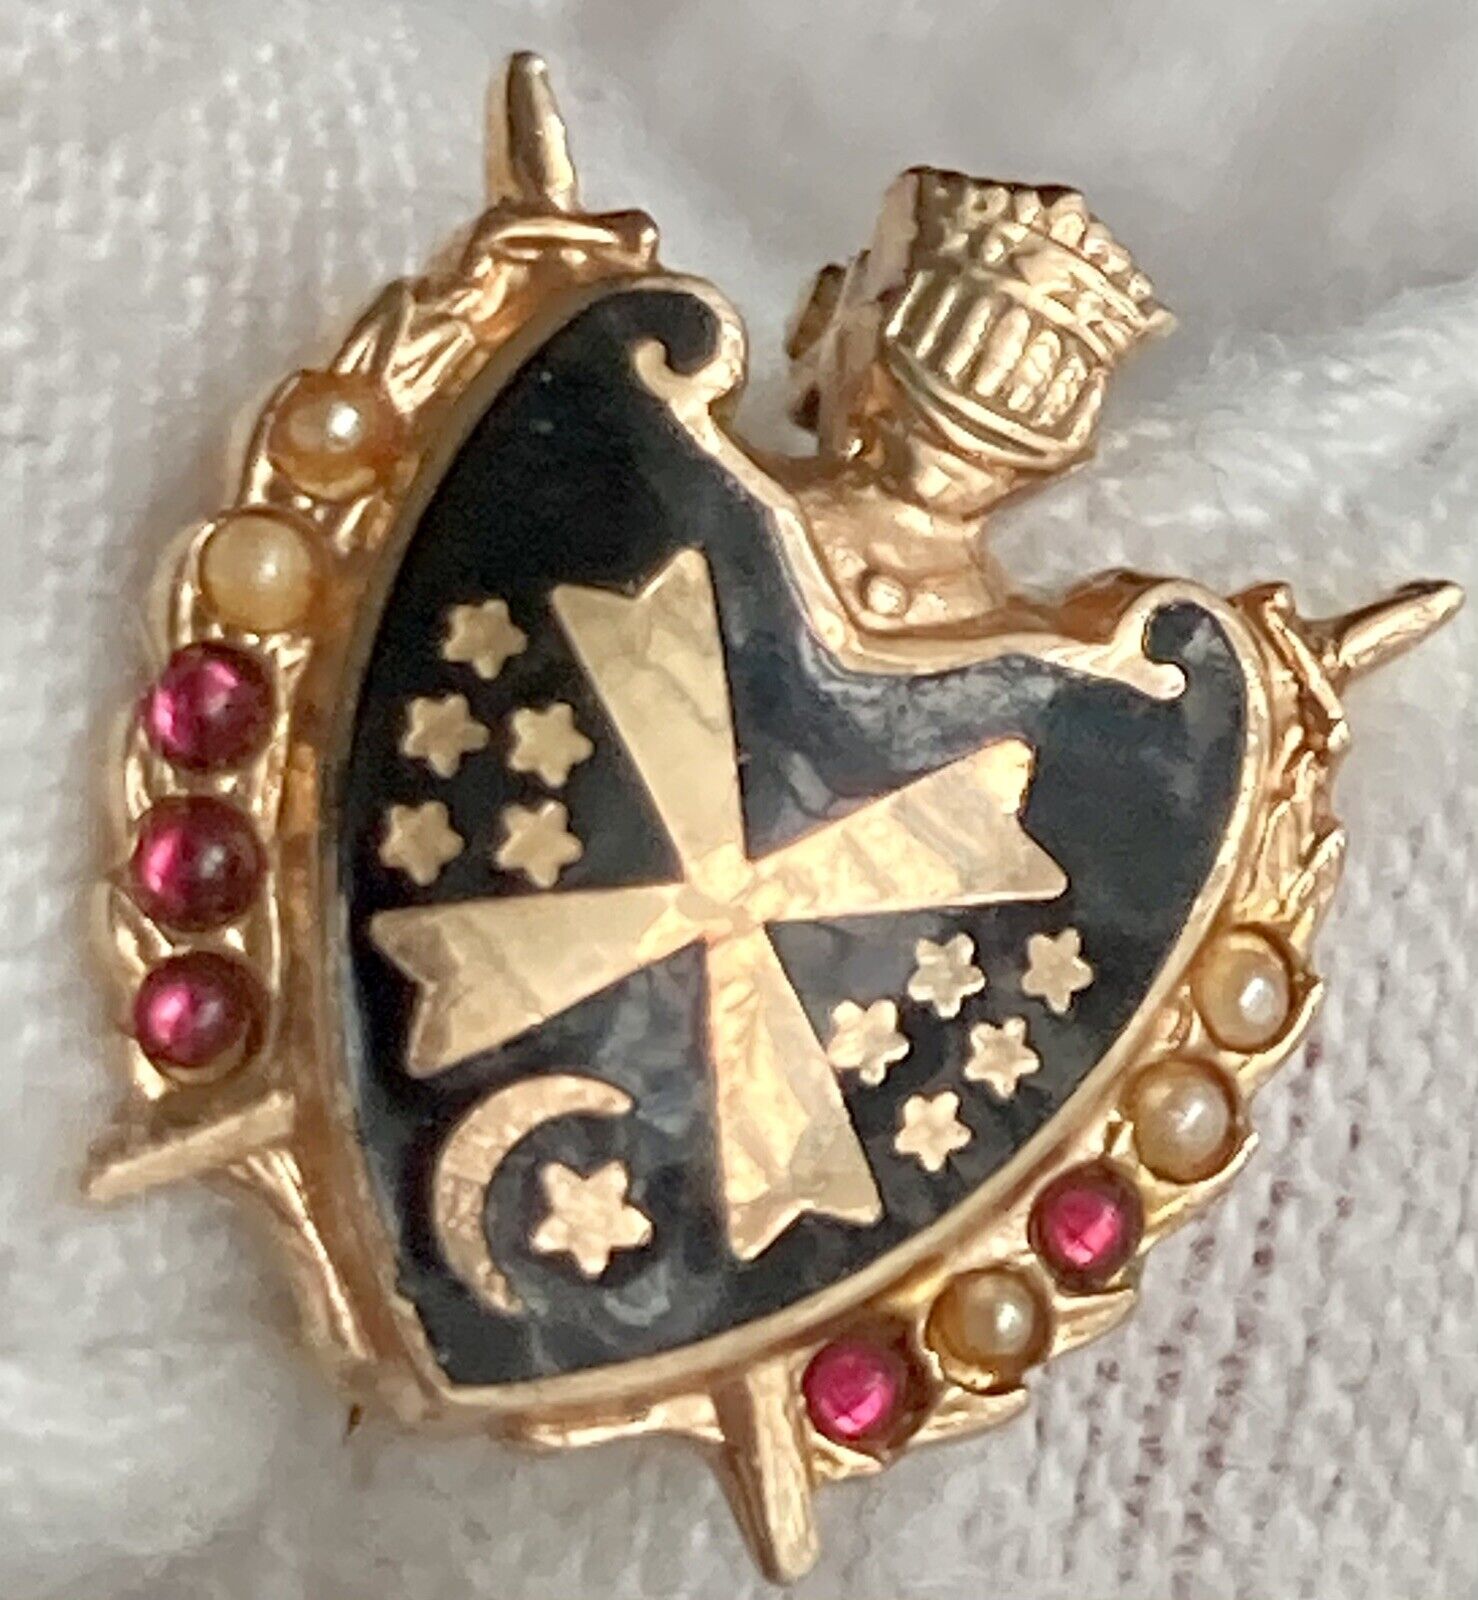 10k Yellow Gold Ruby Seed Pearls Order of De Molay Lapel Pin .50” Antique Stamp